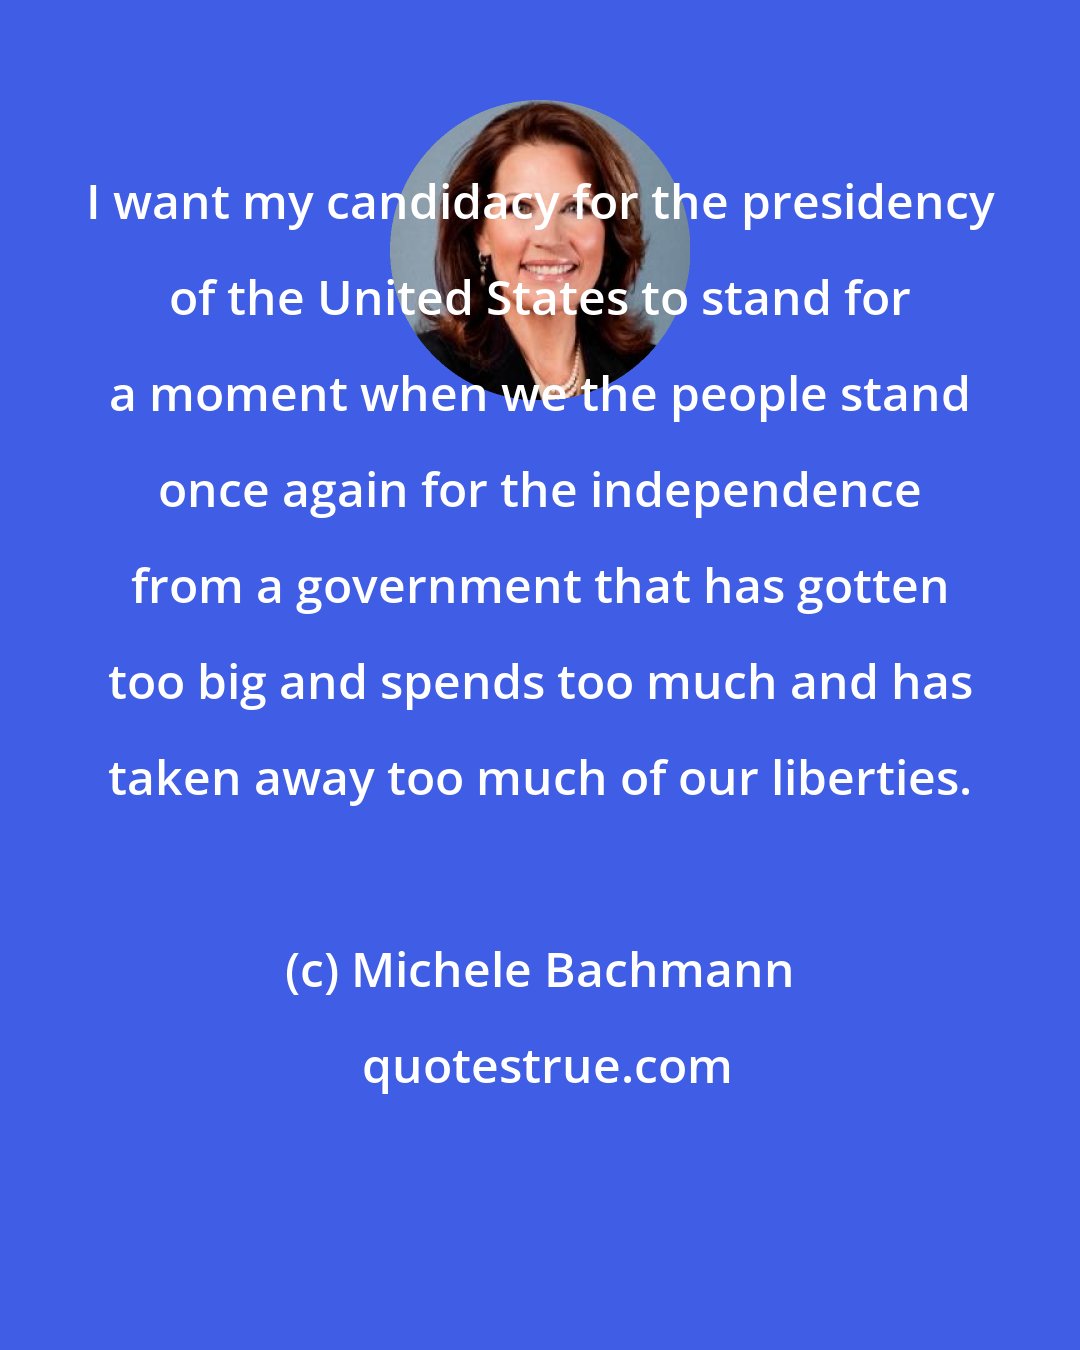 Michele Bachmann: I want my candidacy for the presidency of the United States to stand for a moment when we the people stand once again for the independence from a government that has gotten too big and spends too much and has taken away too much of our liberties.